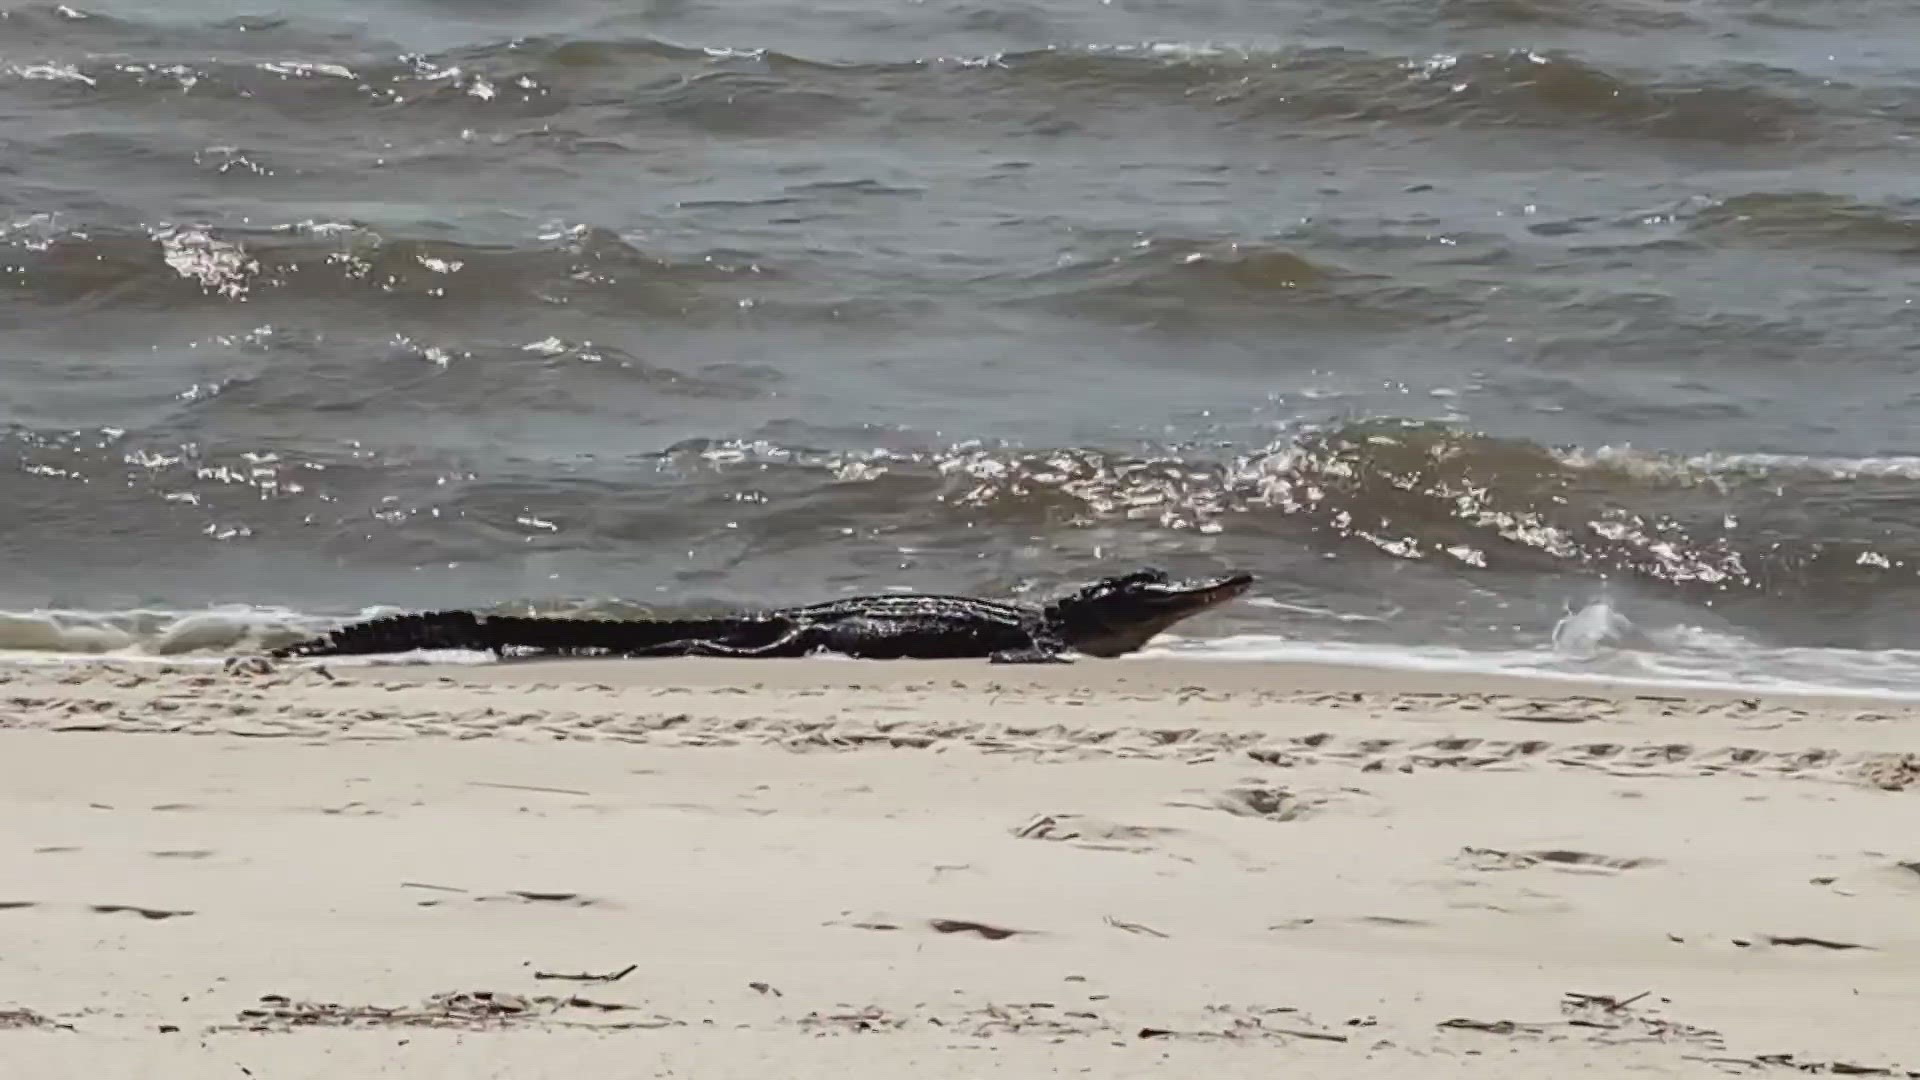 Saturday, visitors in Waveland shared the beach with an unusual visitor: a six-to-seven-foot alligator.